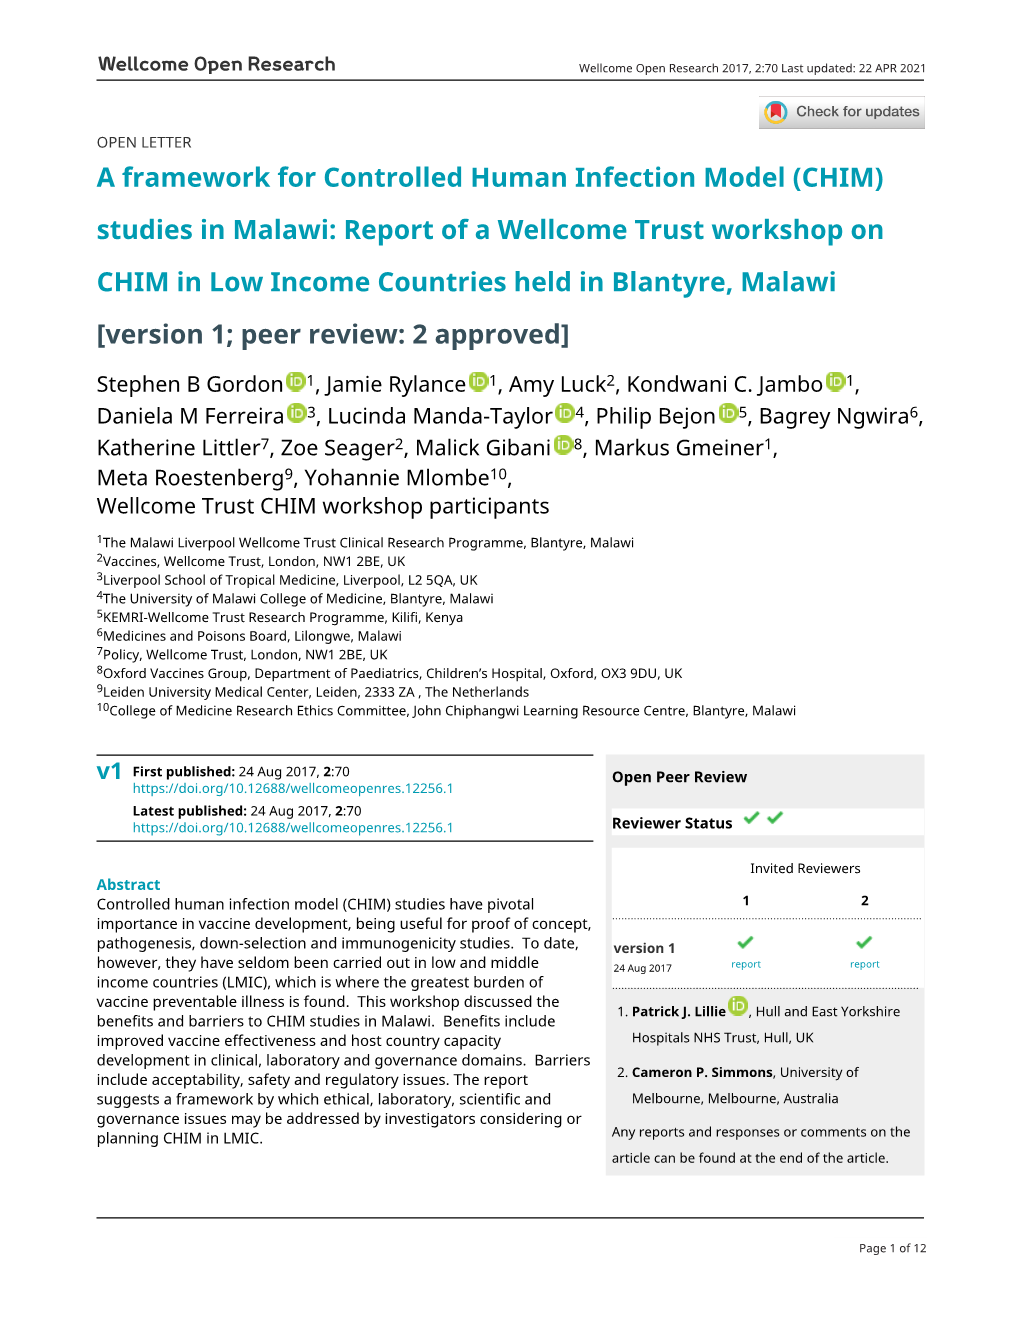 A Framework for Controlled Human Infection Model (CHIM) Studies in Malawi: Report of a Wellcome Trust Workshop On